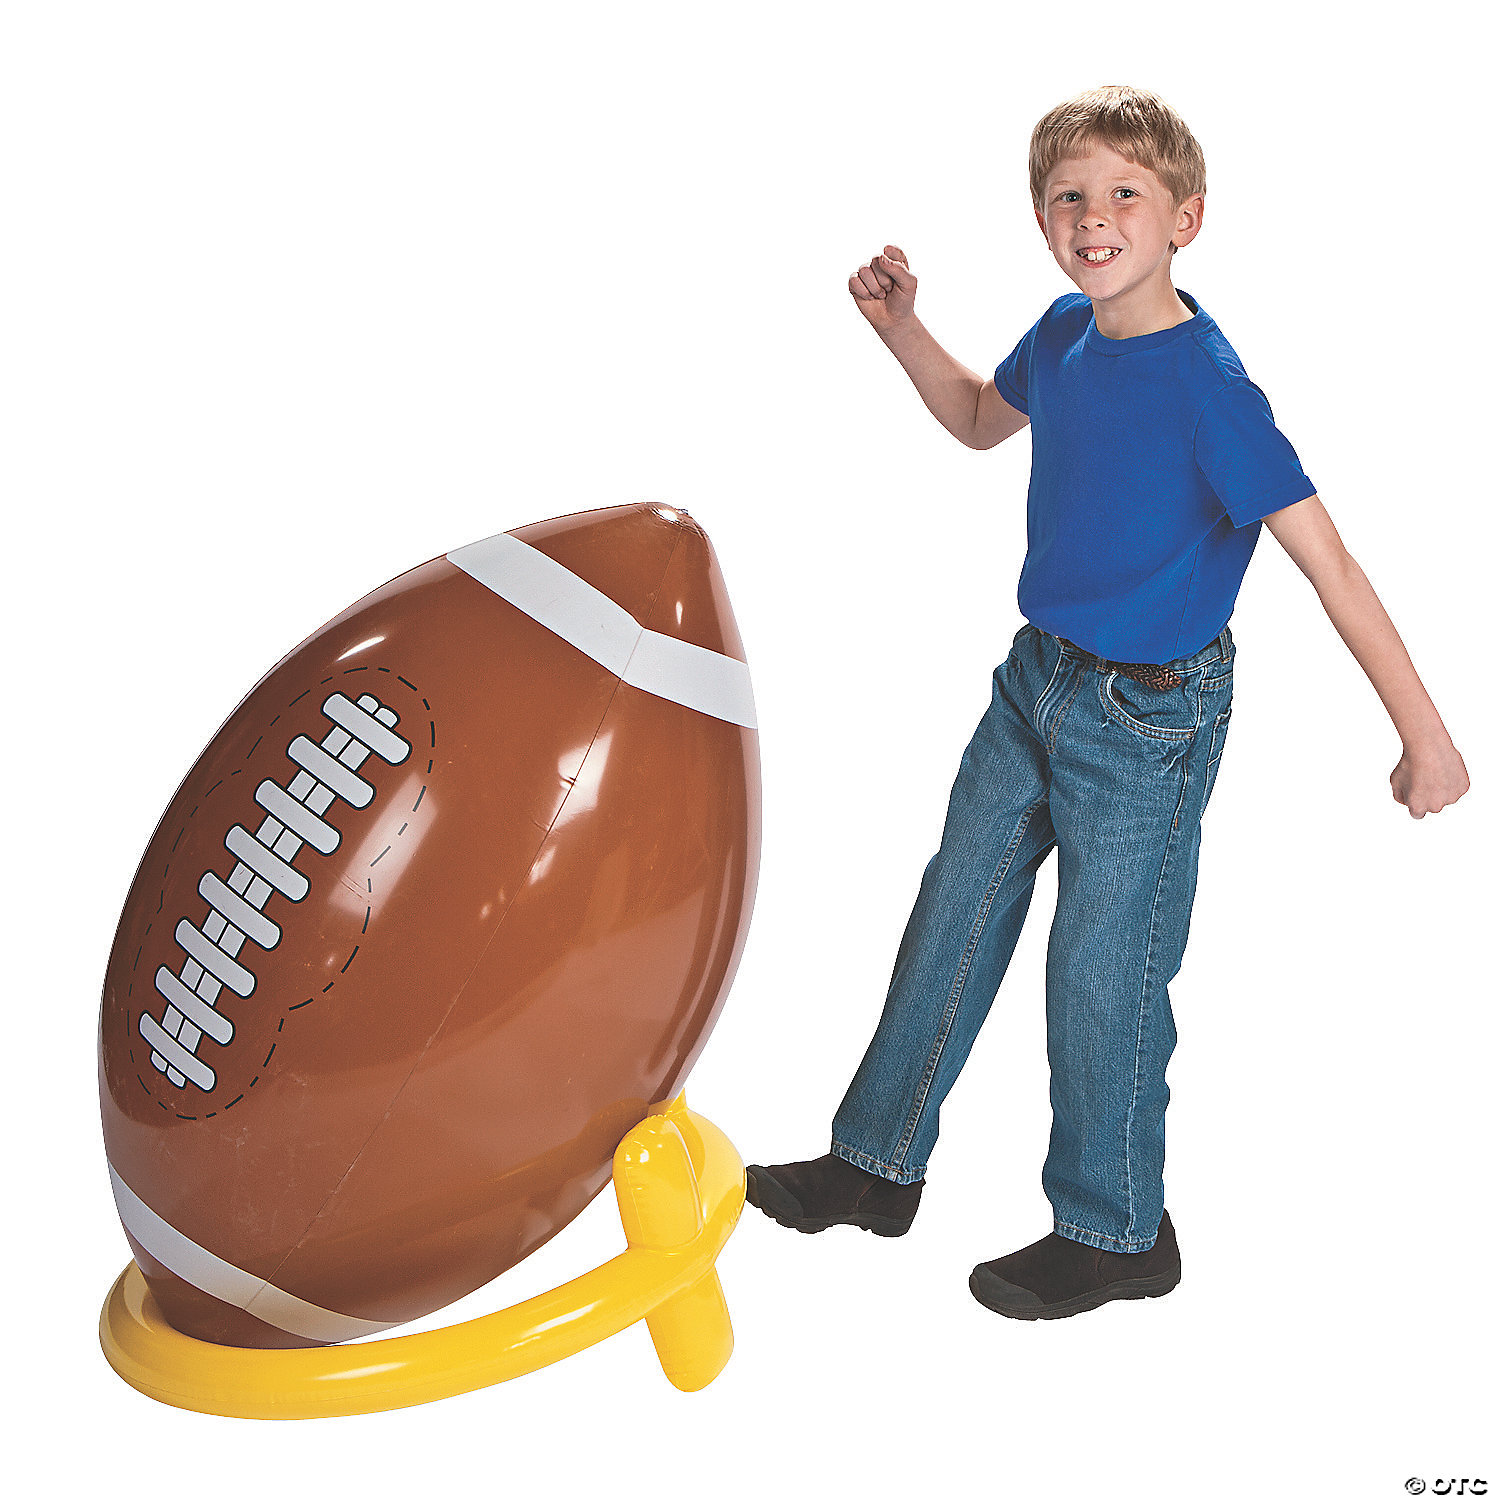 GoFloats 4' Giant Inflatable Football Giant Size Fun On The Field 